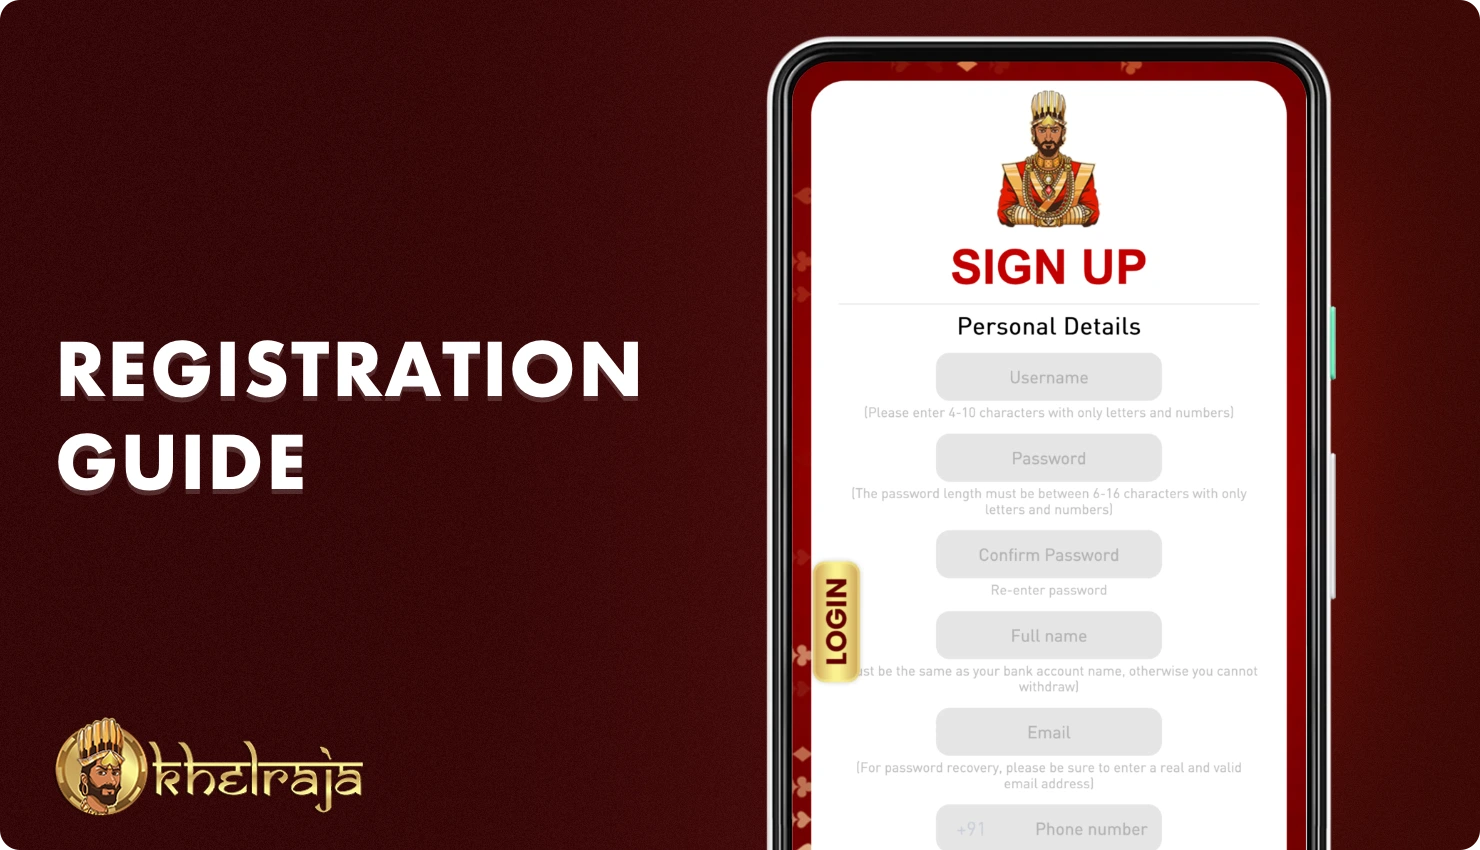 To register on the Khelraja platform, you need to follow next steps